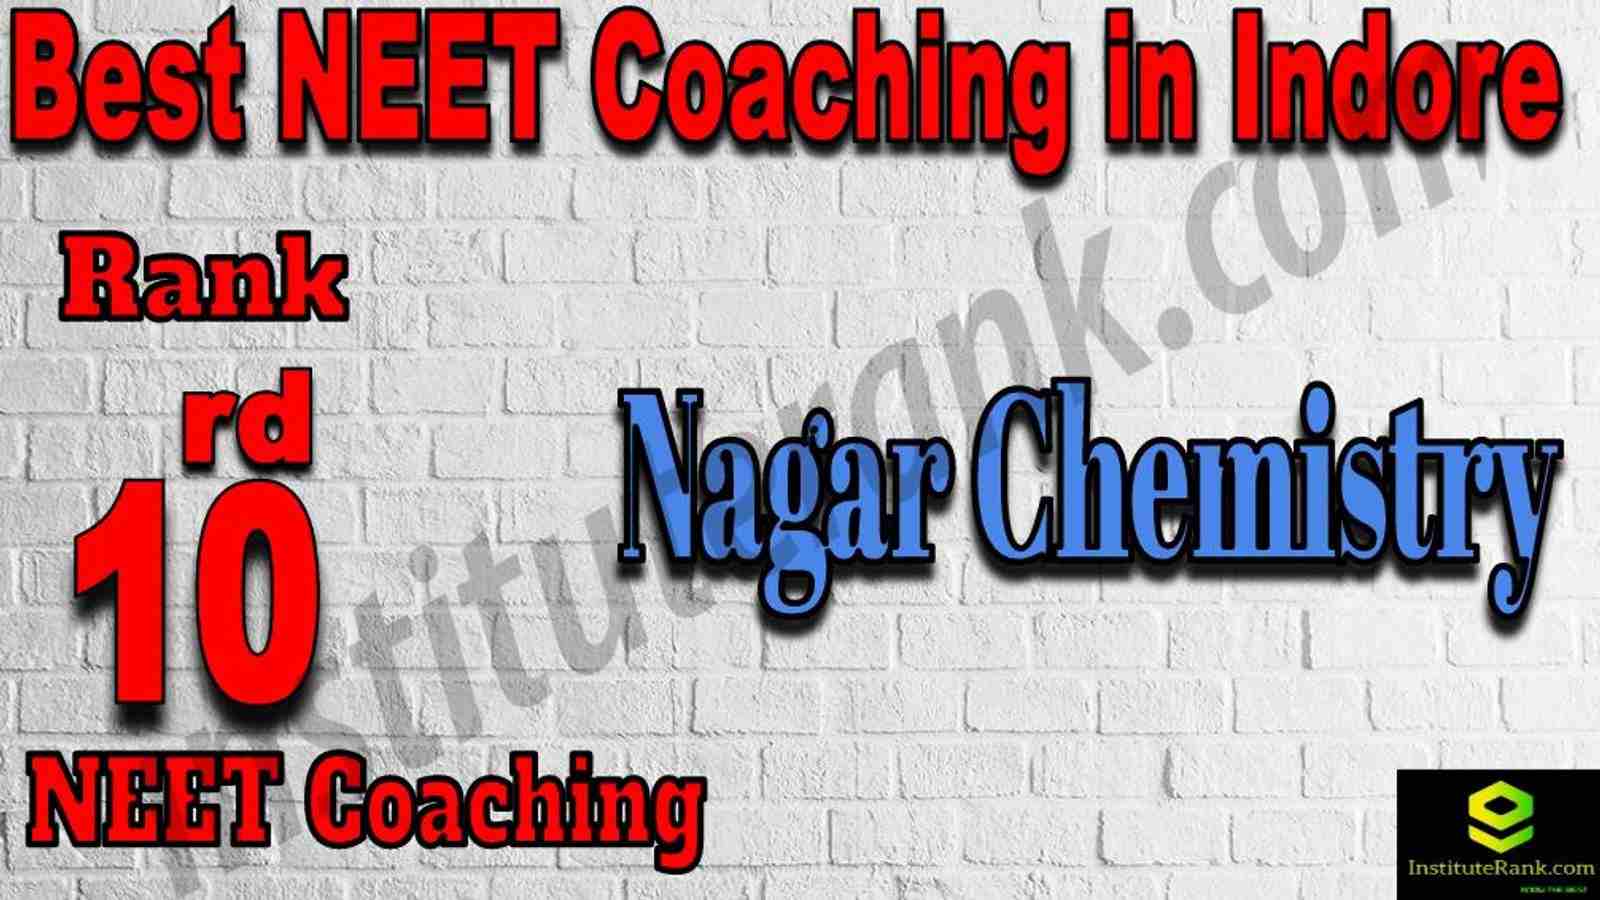 10th Best Neet Coaching in Indore